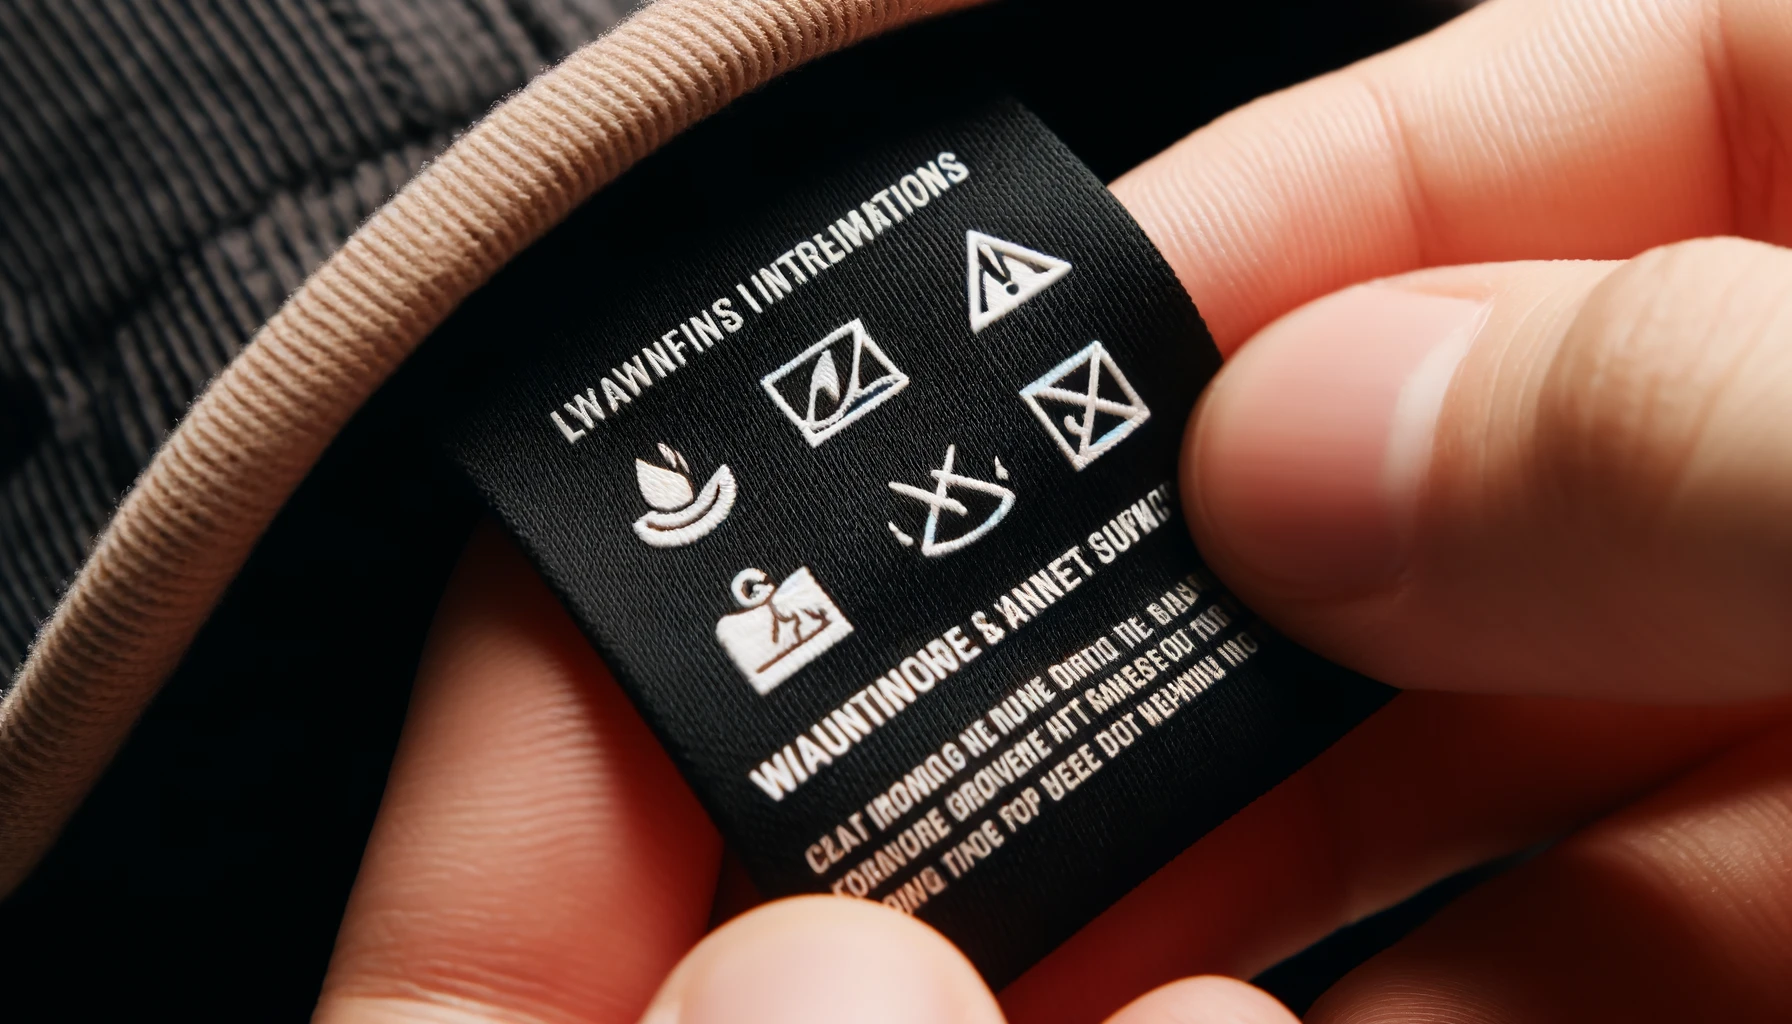 A close-up of a care tag on a cap, showing washing instructions and warnings, with clear and legible text.